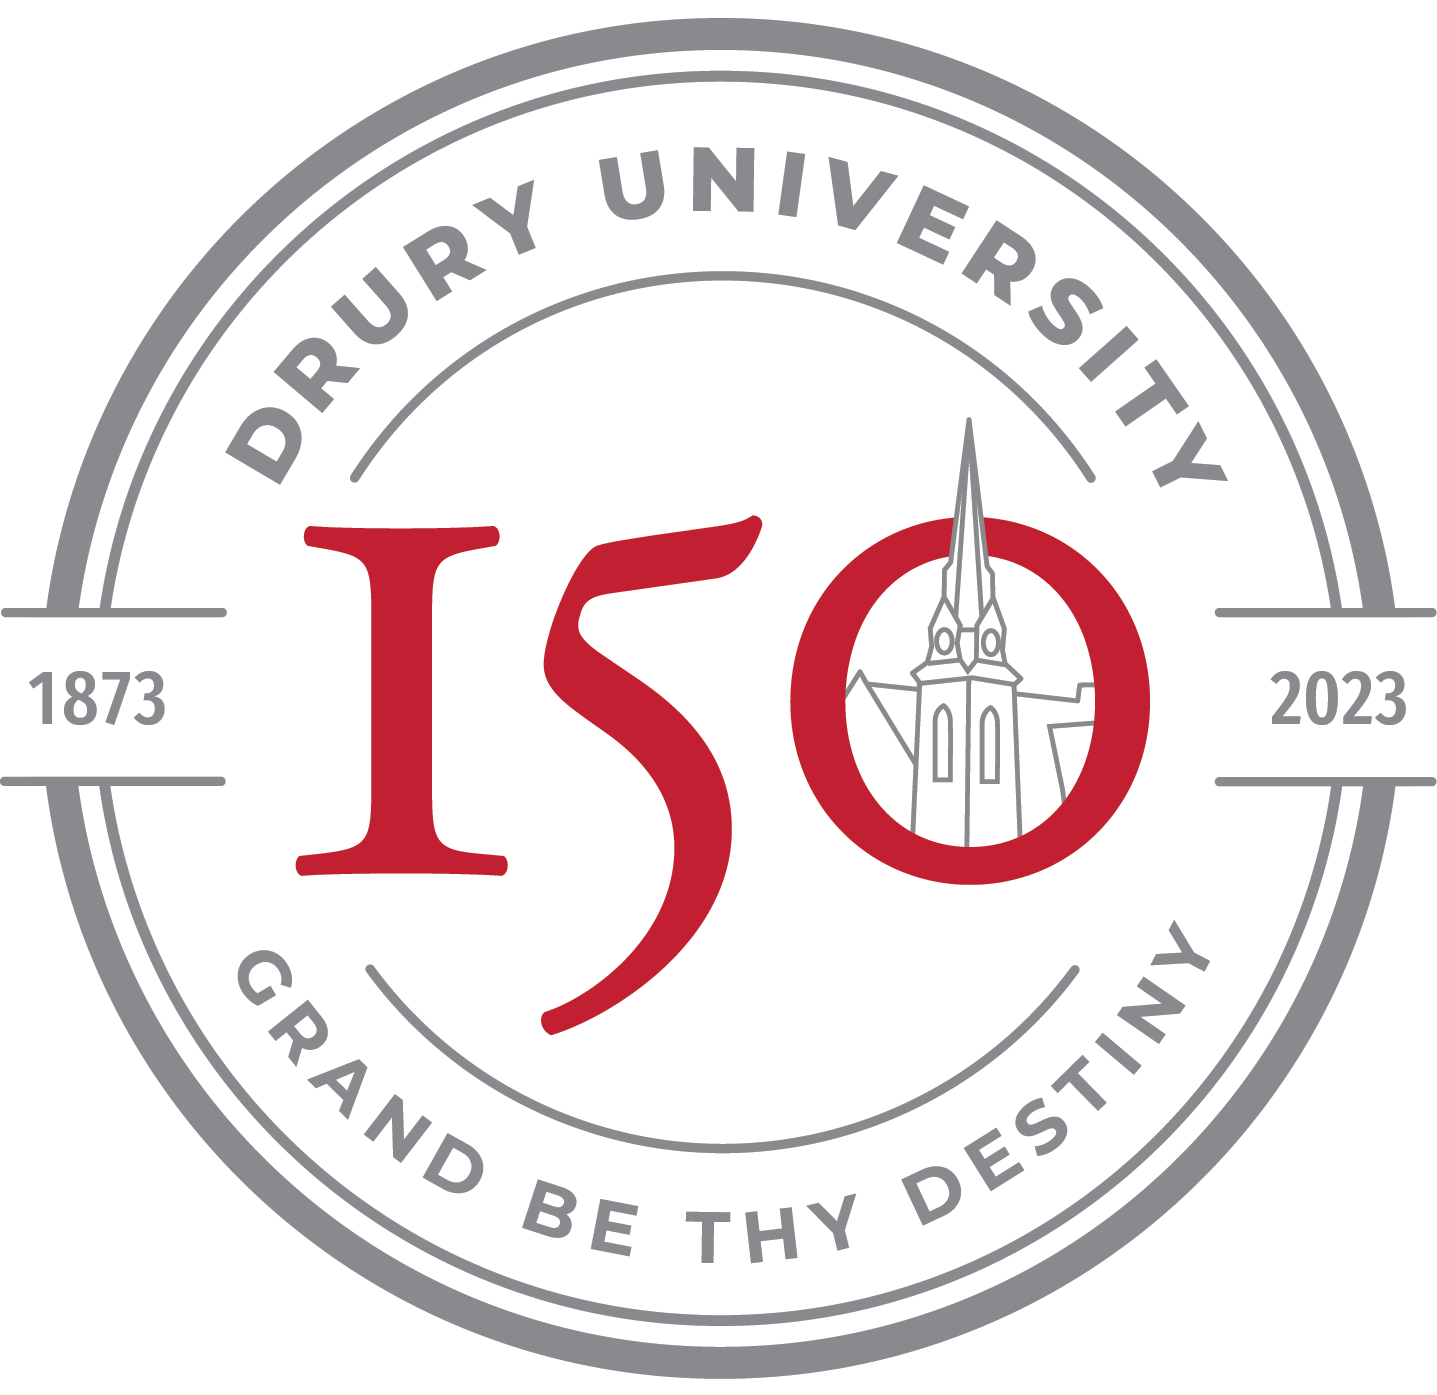 150th Anniversary Brand Assets and Style Guide Drury University